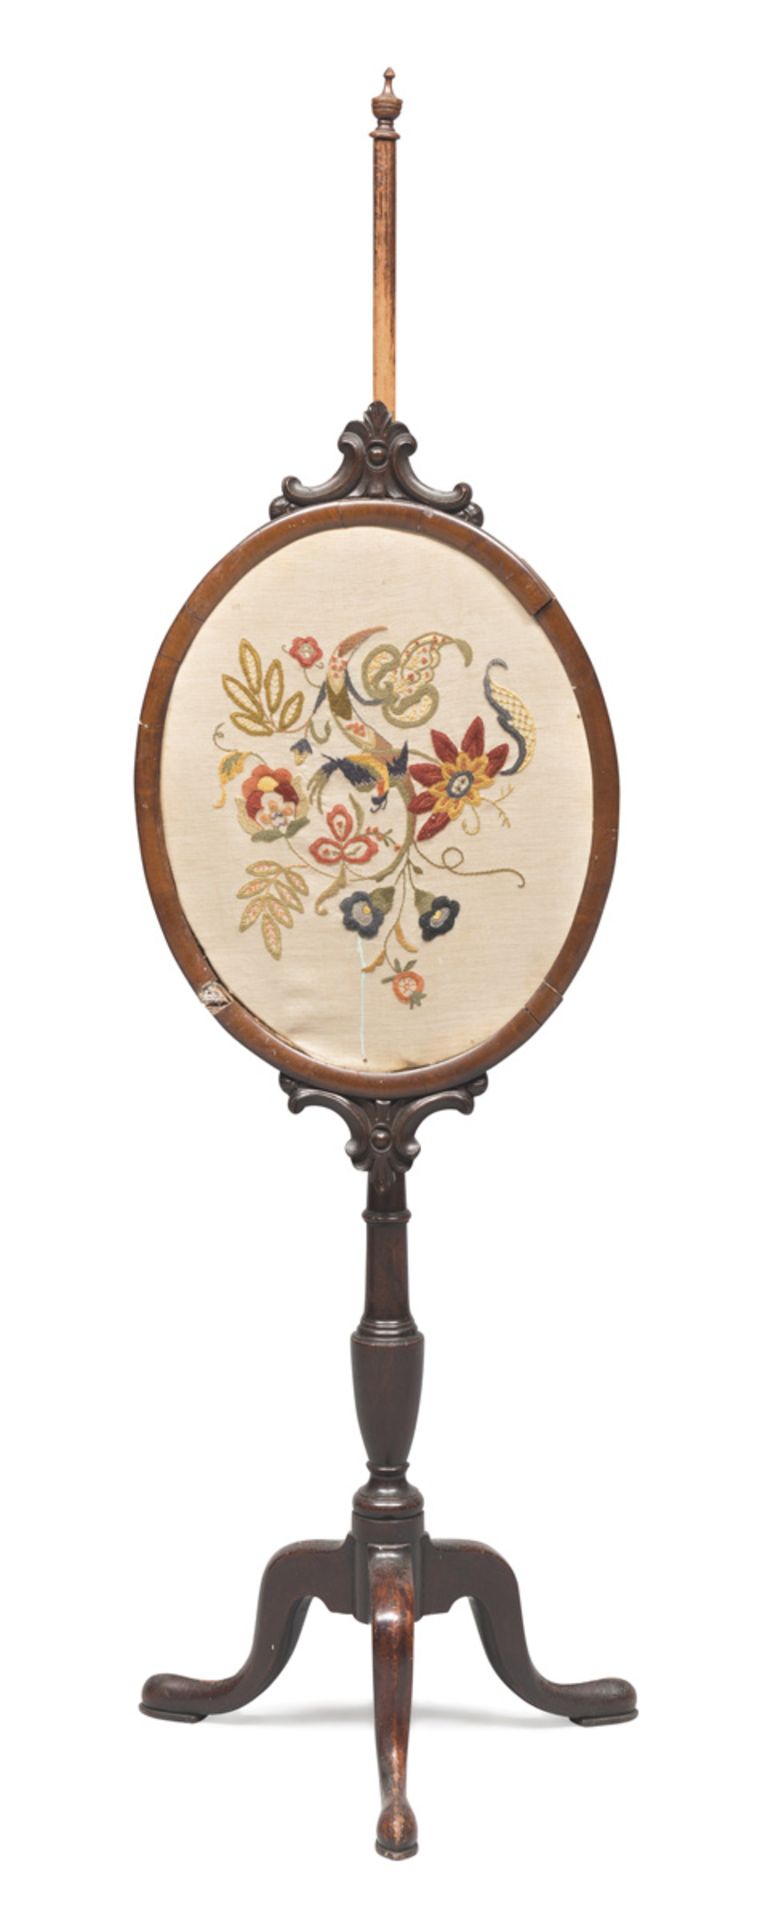 FIRE SCREEN IN MAHAGONY, 19TH CENTURY oval shape, with small tapestry embroidered with flowers.